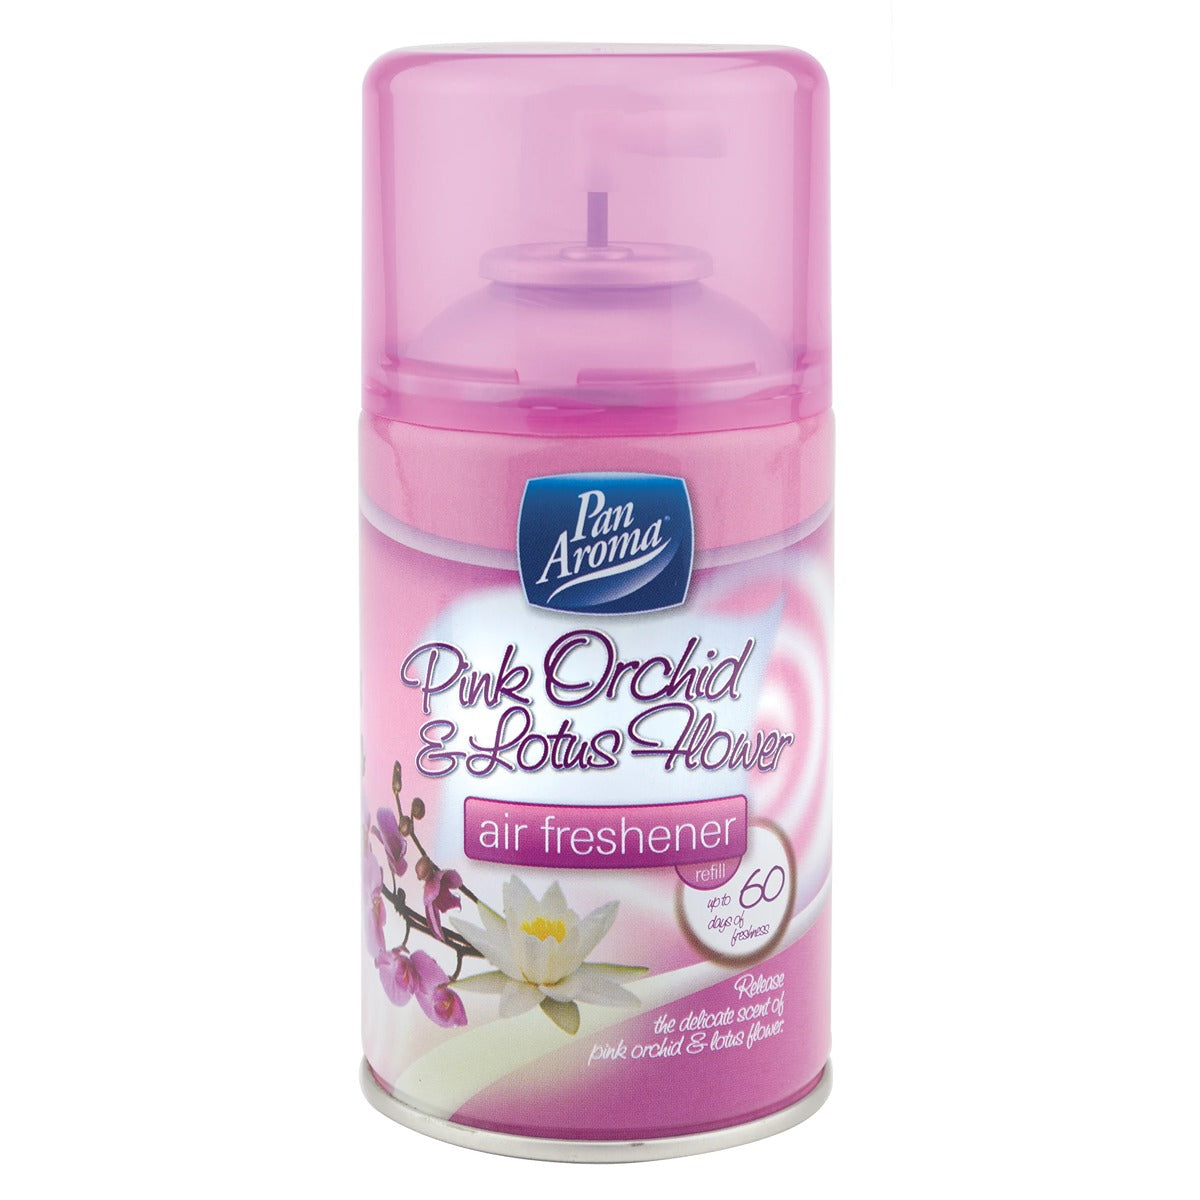 Pan Aroma - Pink Orchid & Lotus Flower Air Freshener Refill - 250ml - Continental Food Store